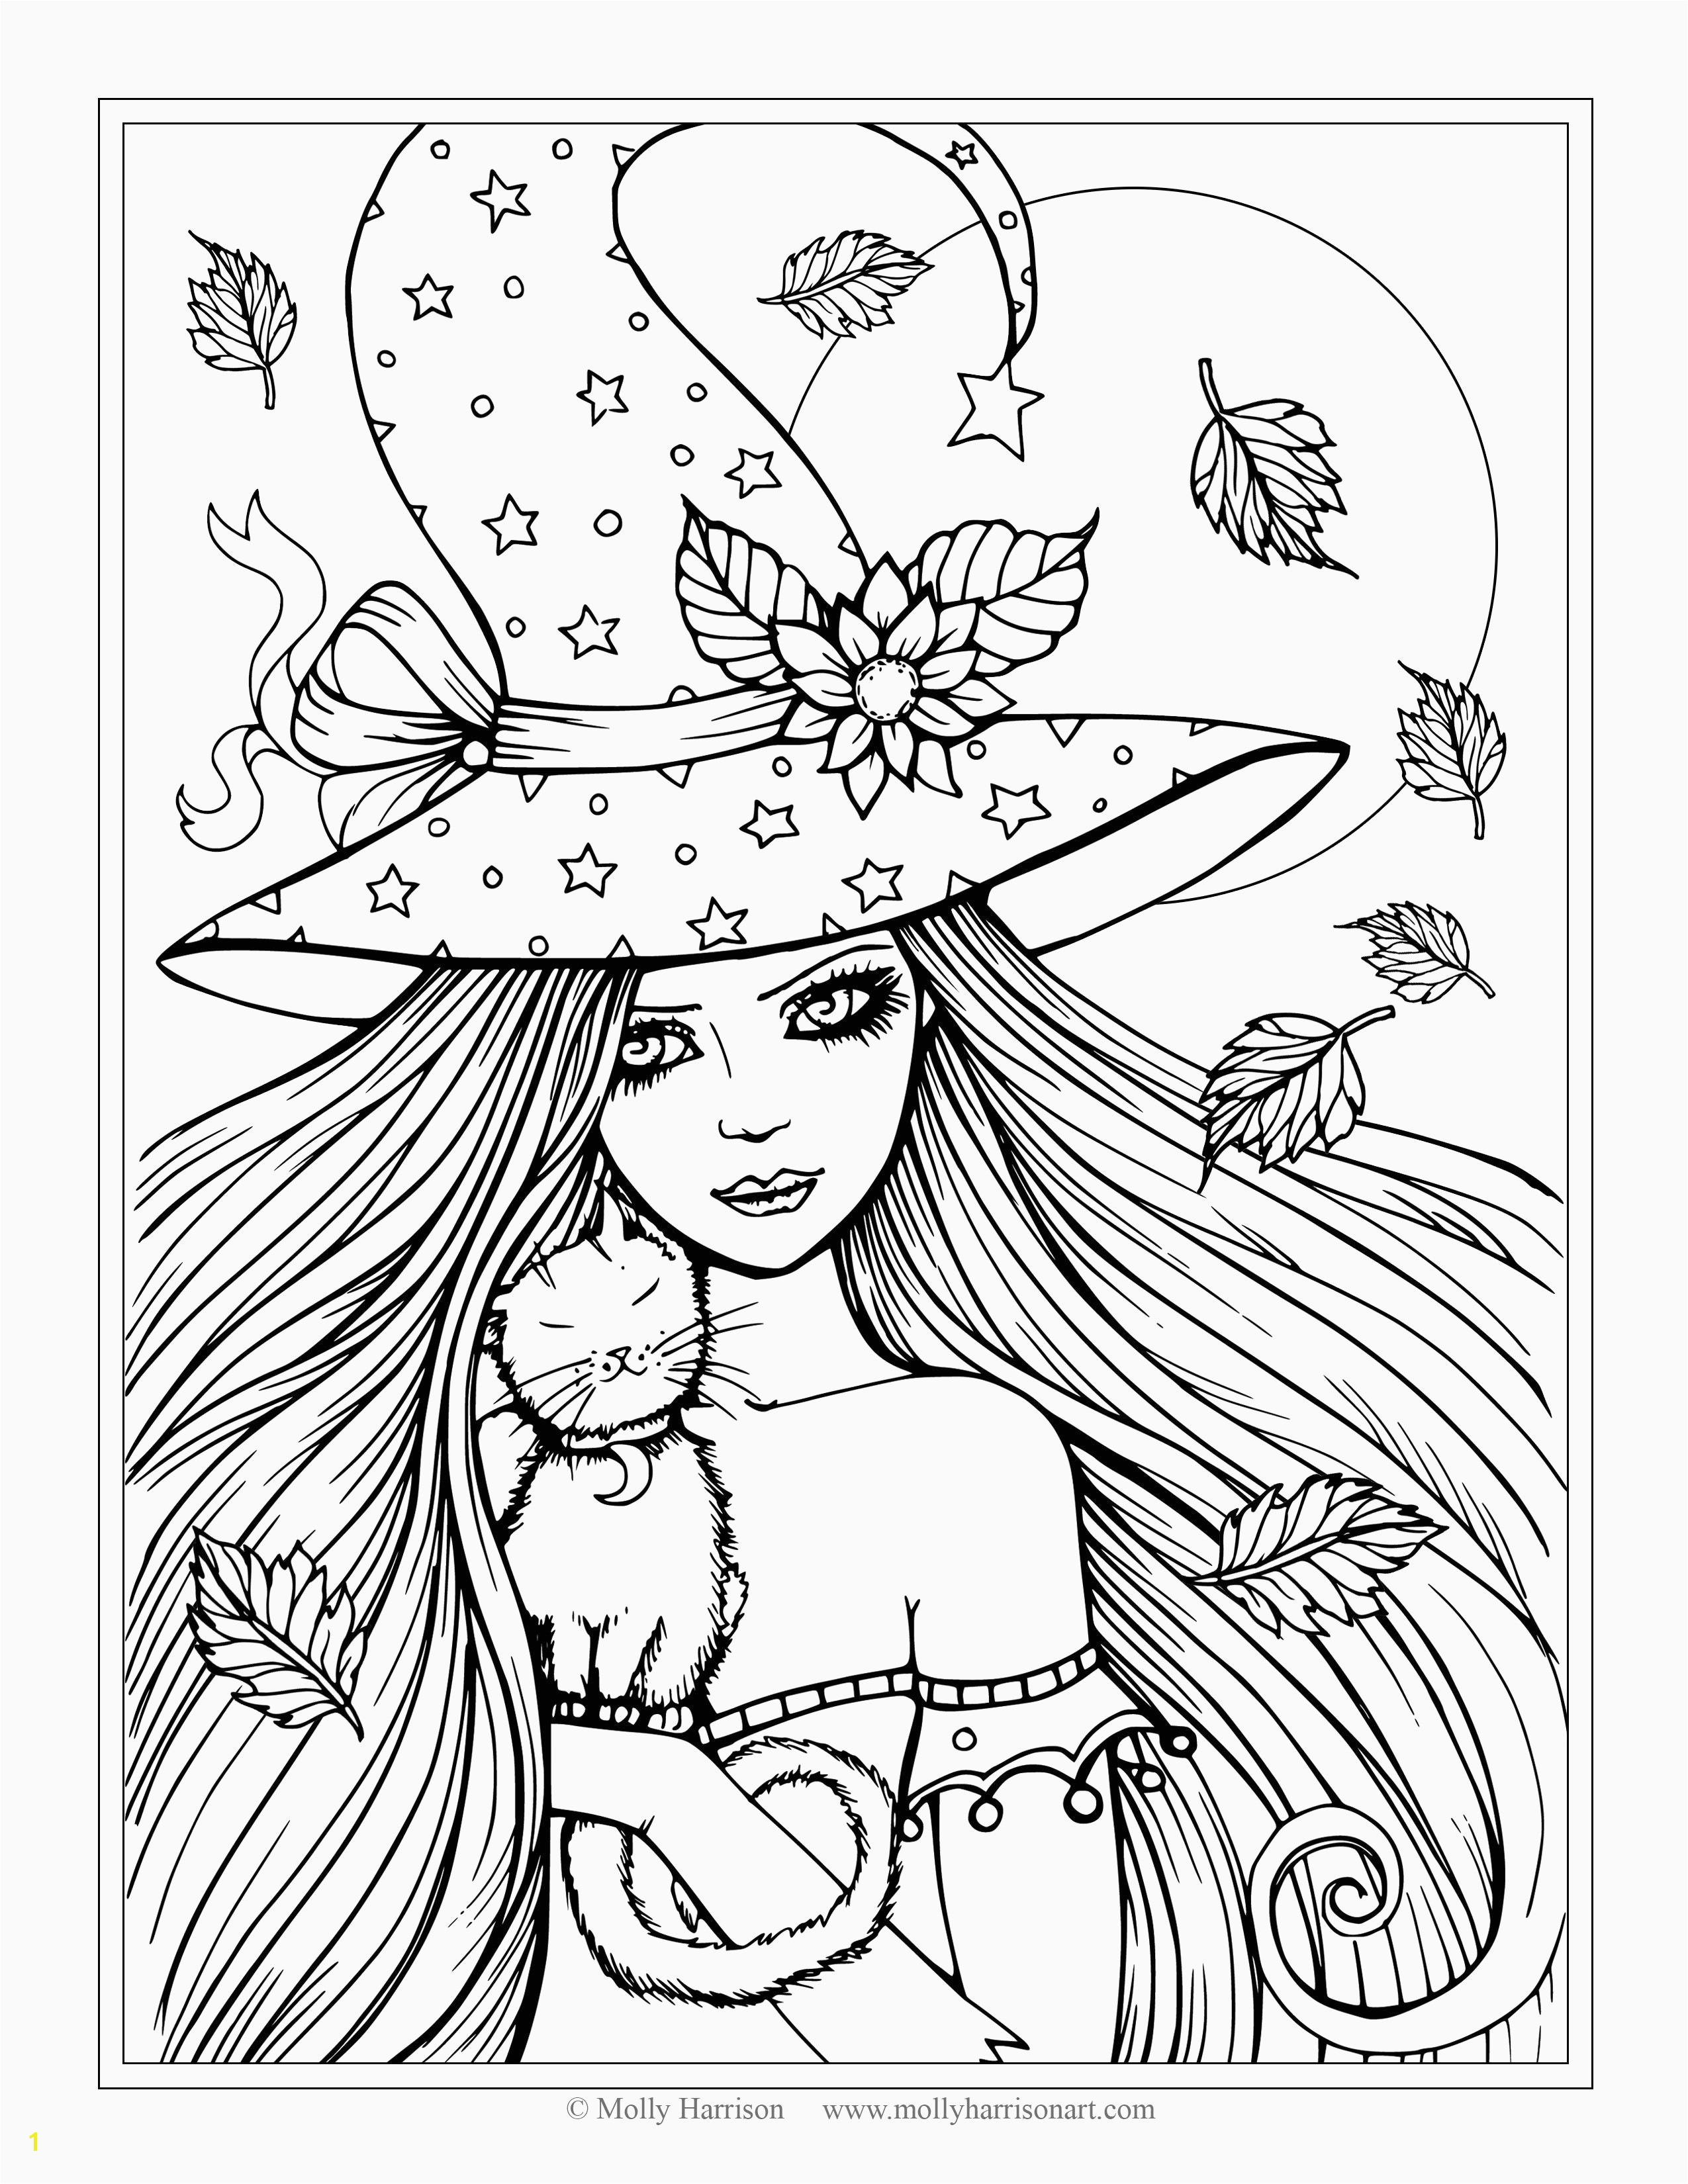 Free Coloring Pages to Print for Adults Printable Free Coloring Pages for Adults Best Printable Cds 0d